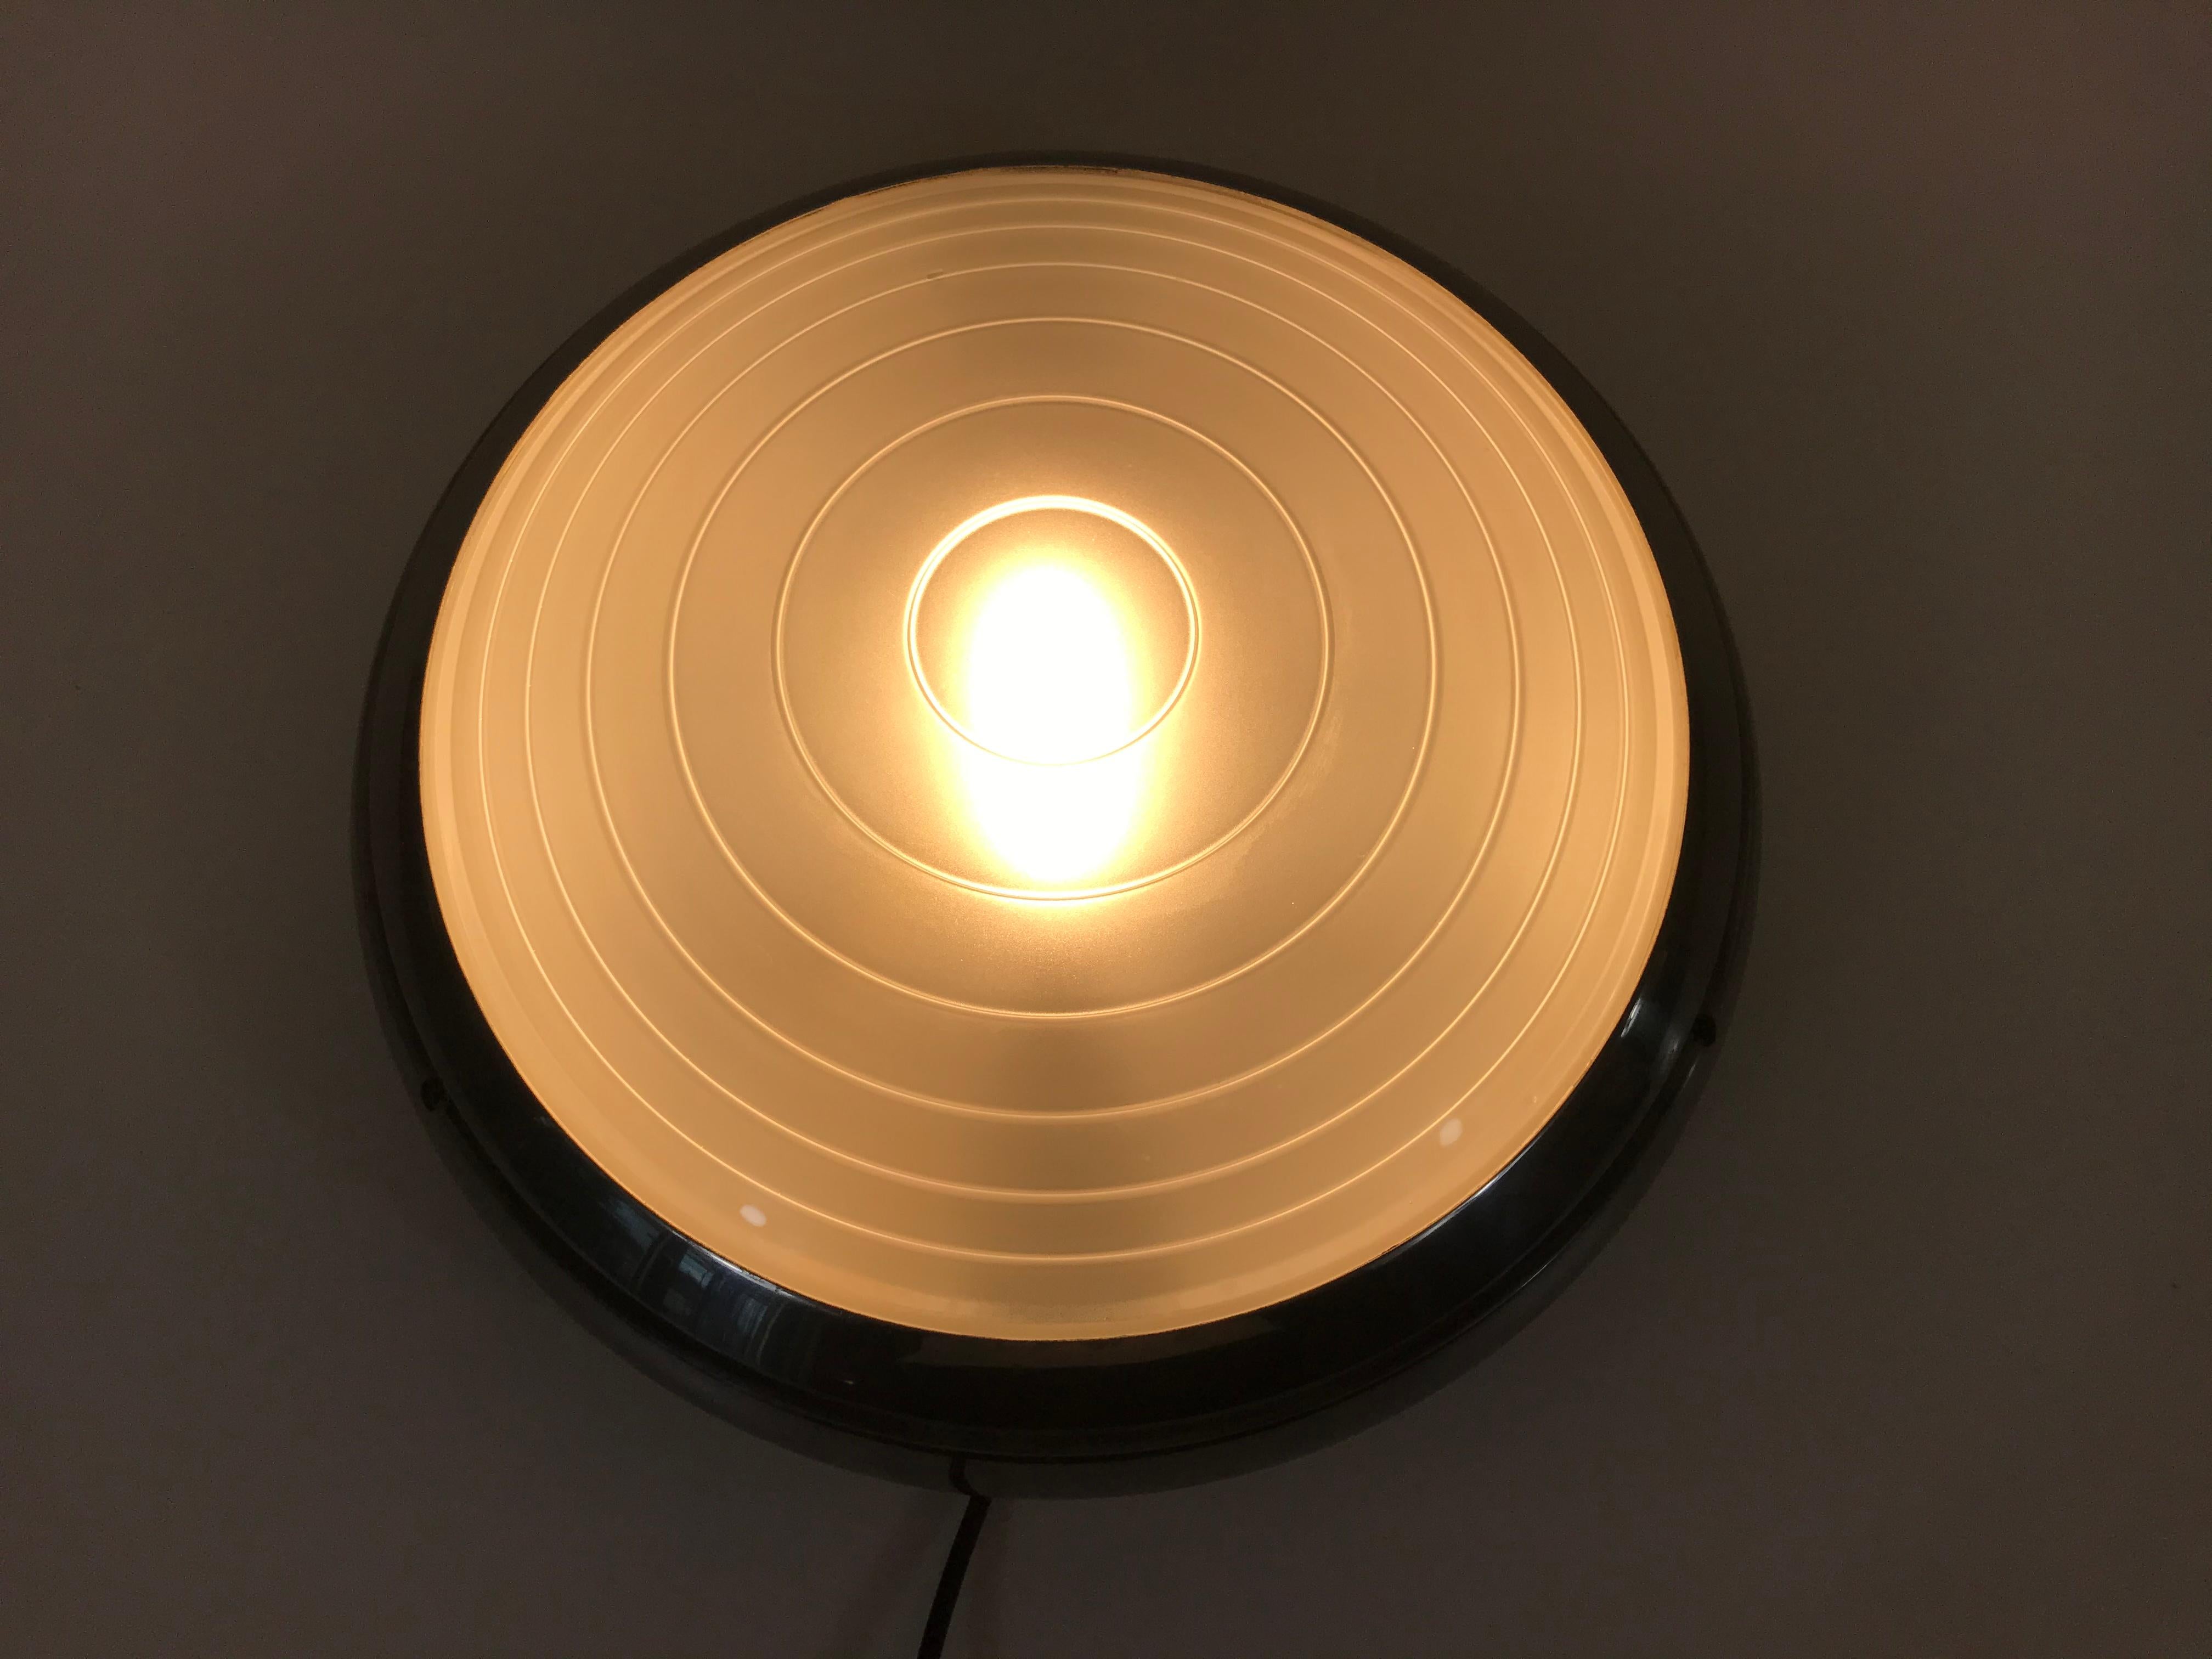 Wall lamp by Ernesto Gismondi for Artemide. Round glass shade with aluminium frame.

Works with both 120/220V. Very good vintage condition.

Free worldwide shipping.